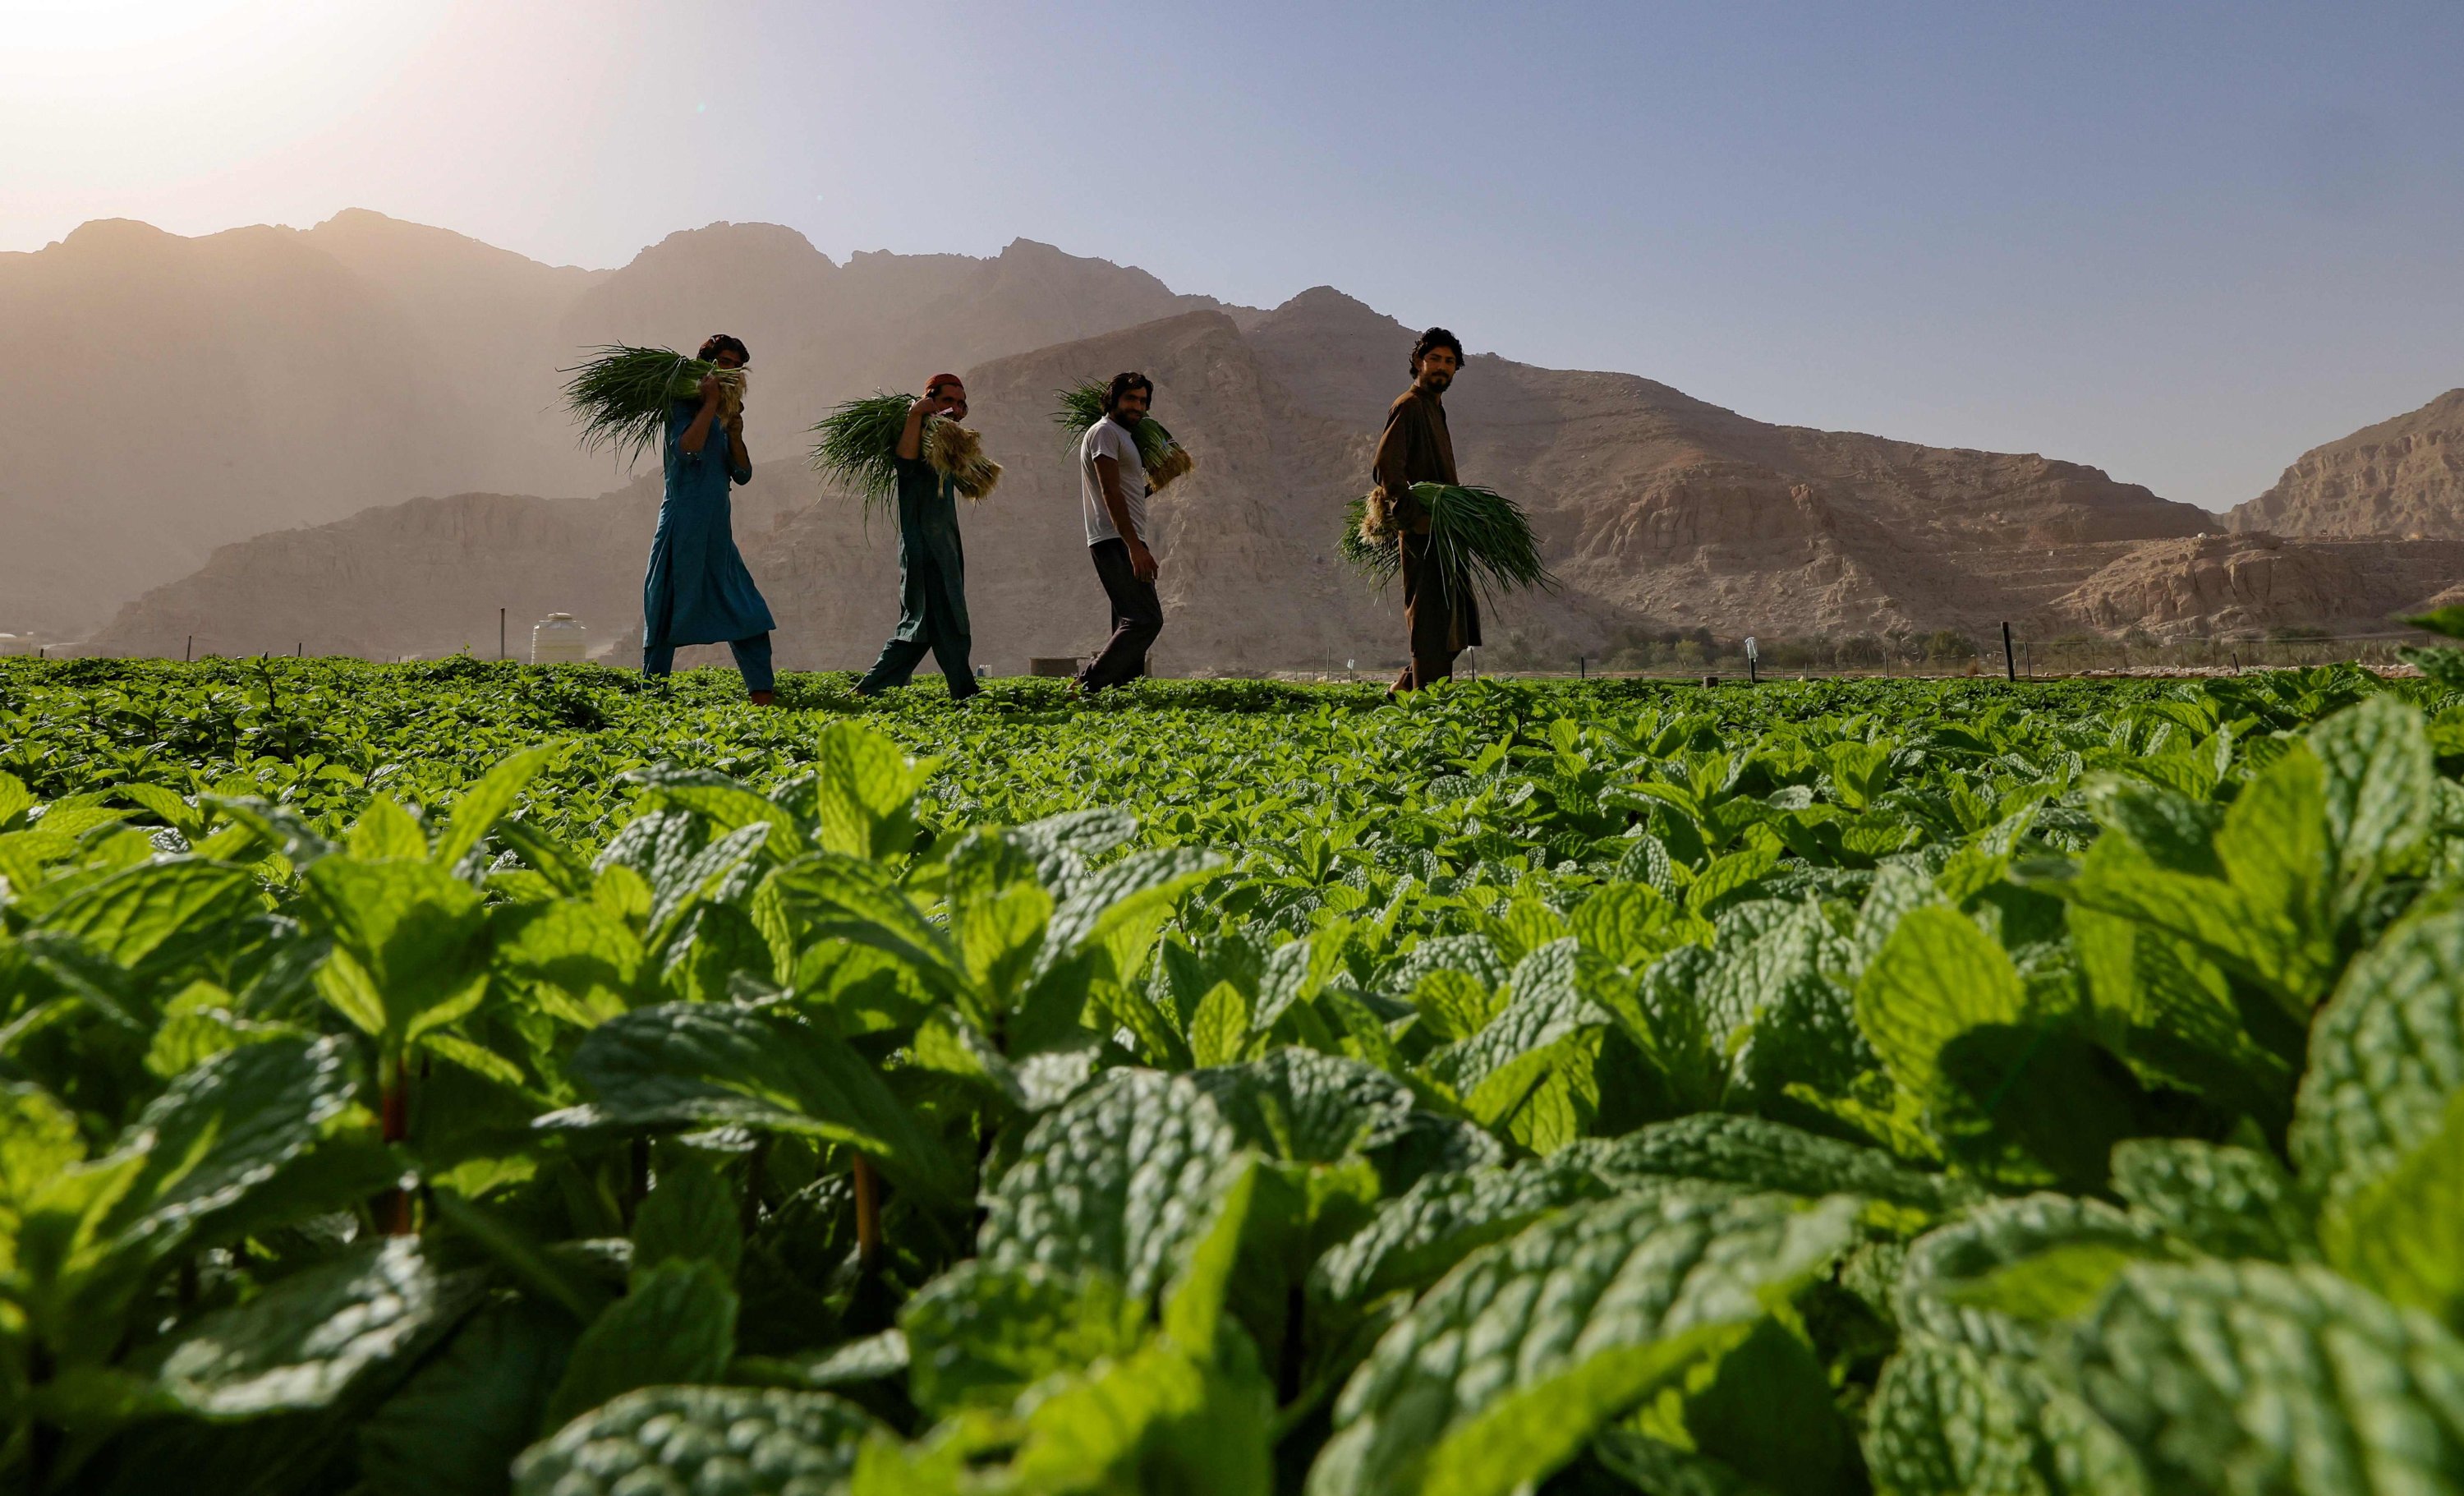 Farmers harvest leafy vegetables in a field in the mountain range of Jabel Jais, in the Gulf of Ras Al Khaimah, United Arab Emirates, Jan. 24, 2021 (Photo: AFP)